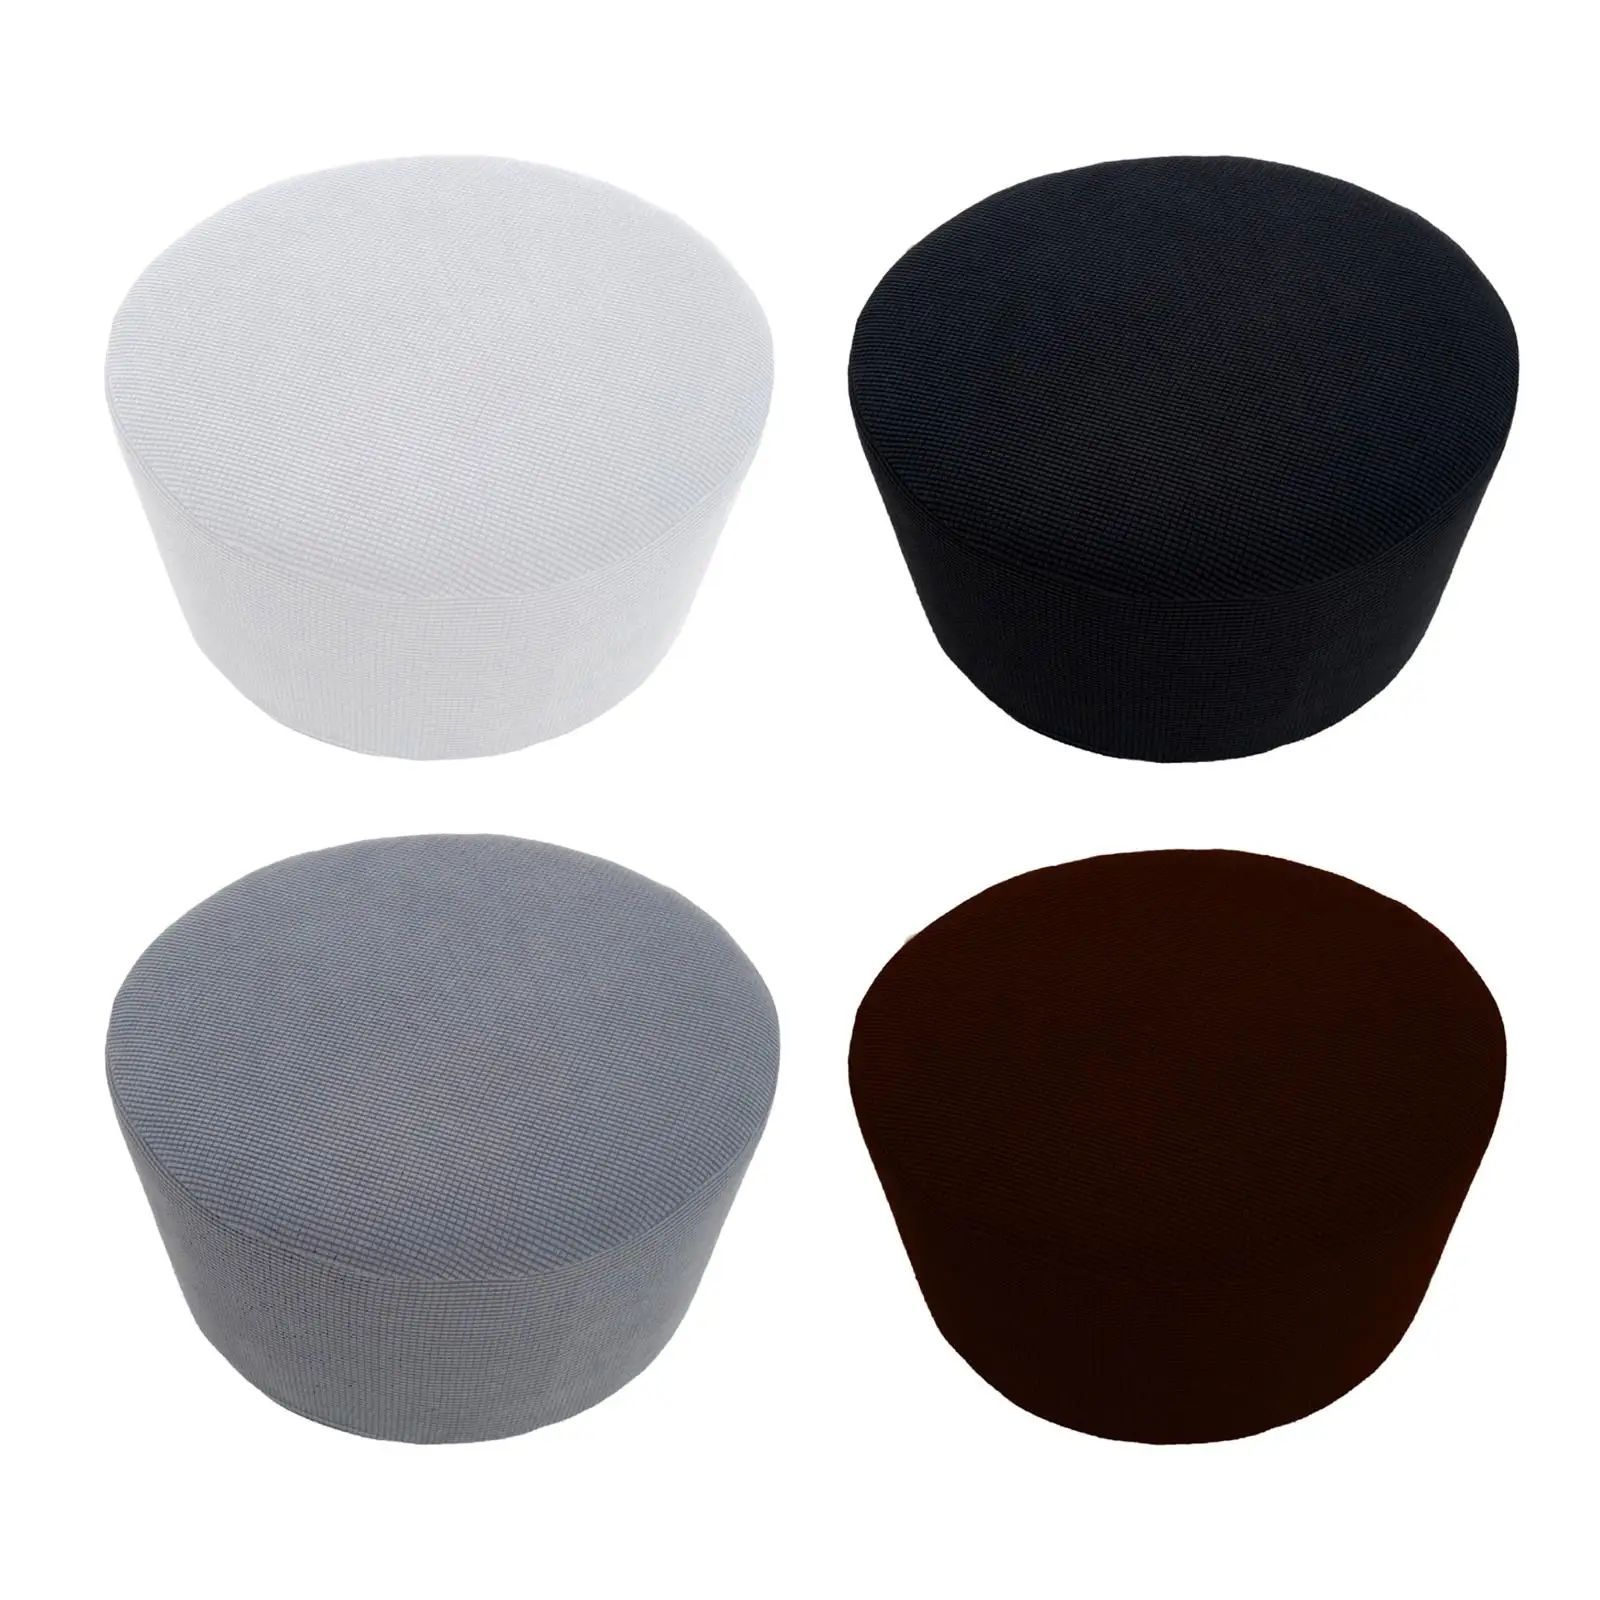 Ottoman Slipcover Furniture Protector Stretchable Thick Soft for Living Room